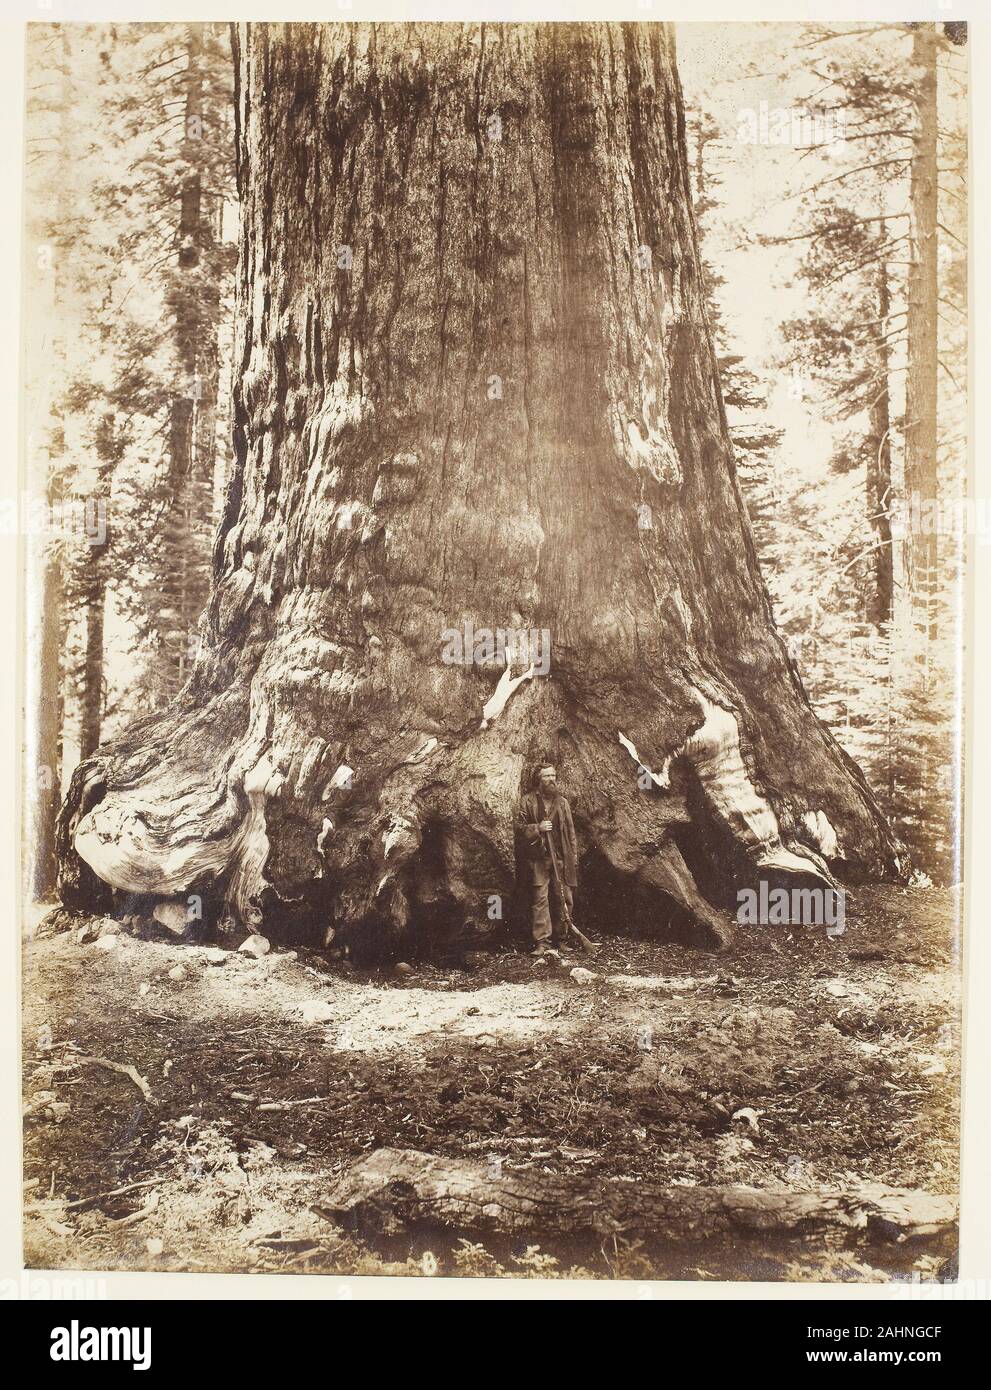 Carleton Watkins. Section of the Grizzly Giant with Galen Clark, Mariposa Grove, Yosemite. 1865–1866. United States. Albumen print Stock Photo